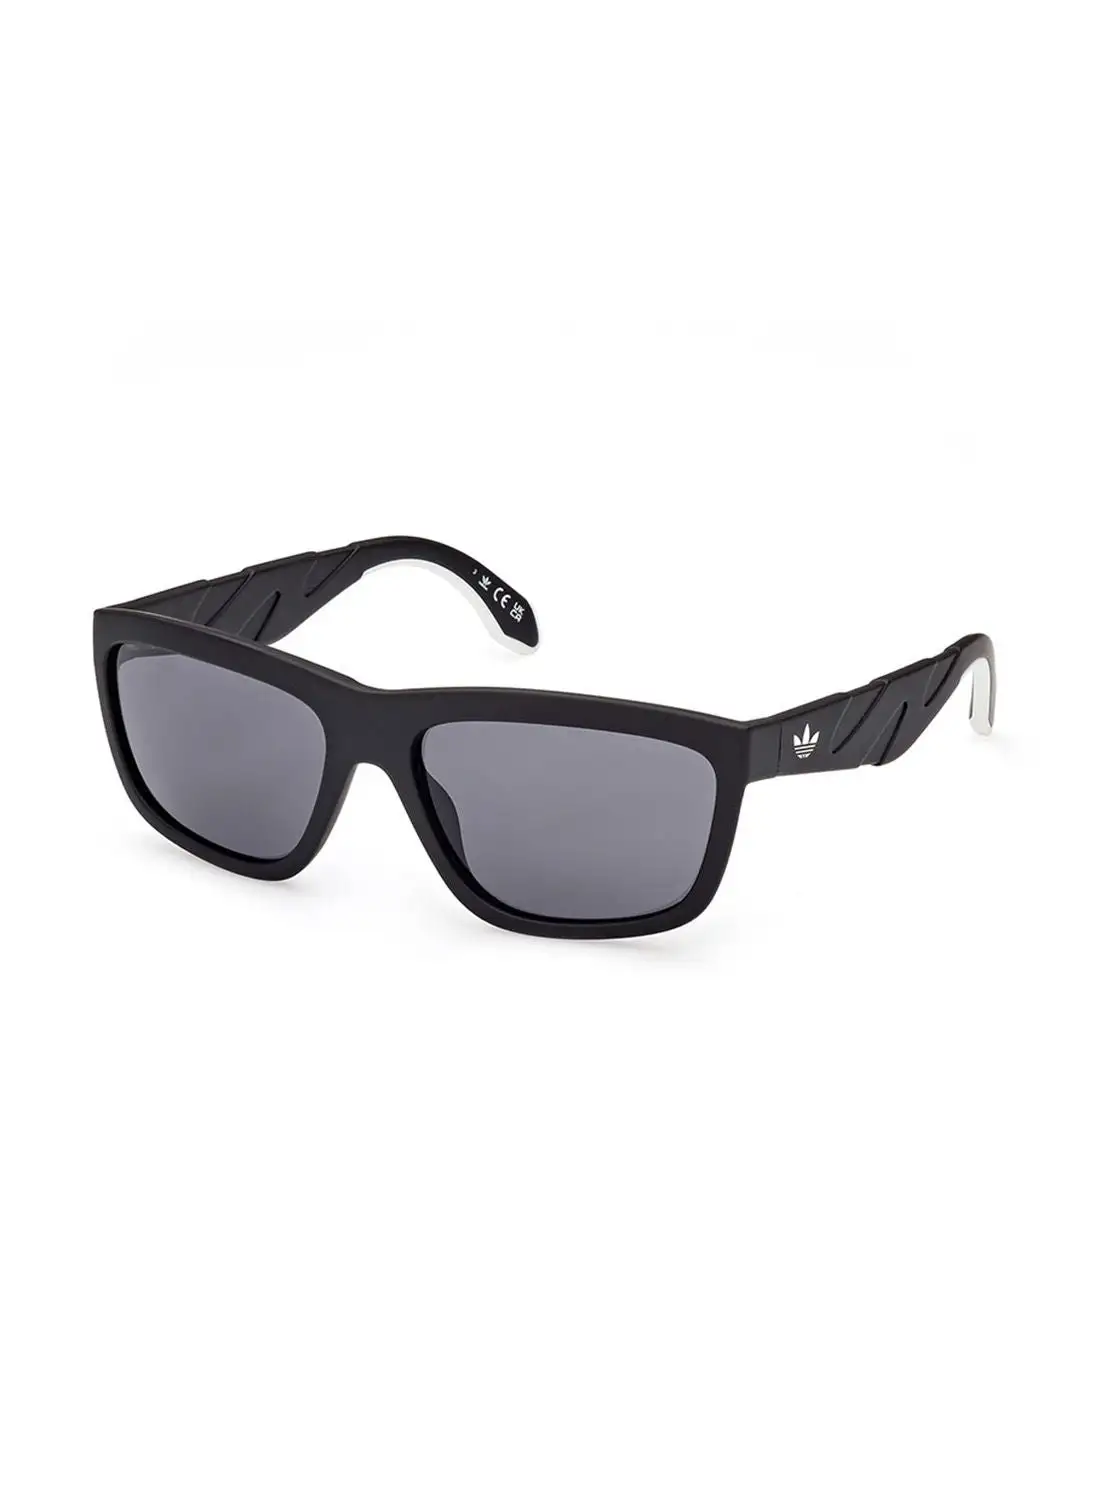 Adidas Sunglasses For Unisex OR009402A58